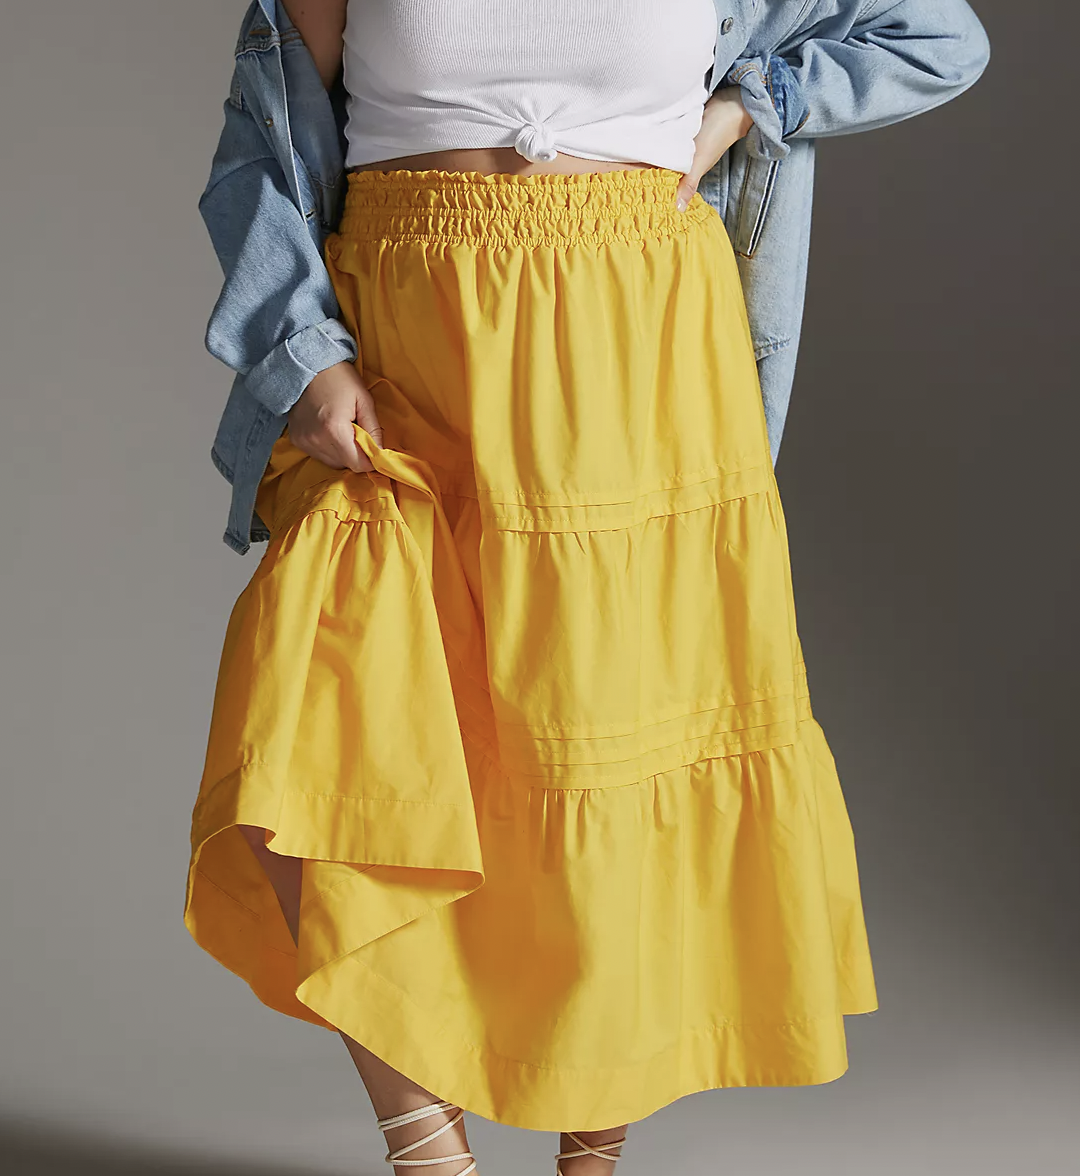 plus size spring clothes from anthropologie